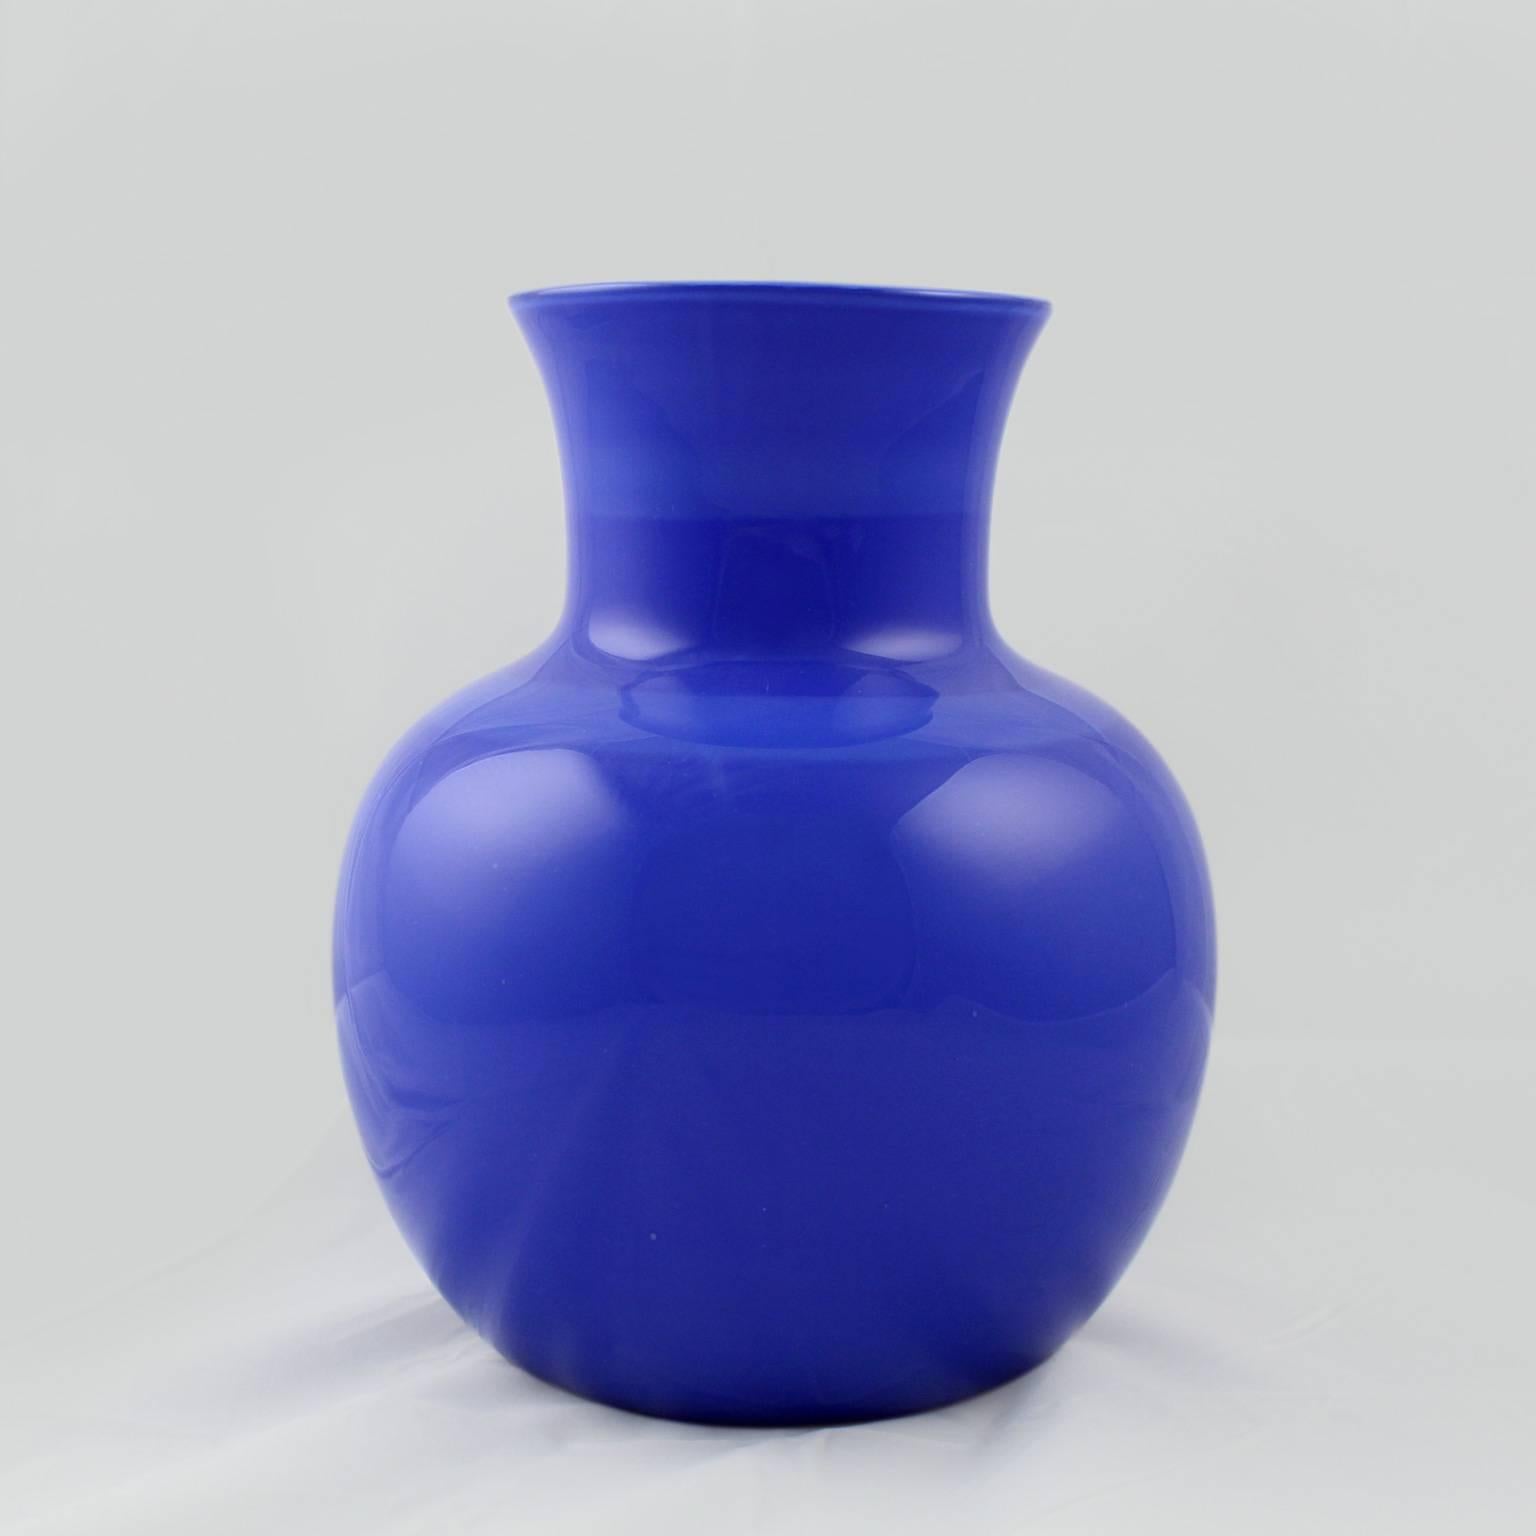 A good sized Venini two-tone blue glass vase made for Vetri Murano in 1983.

The neck and mouth each have a wide band of a lighter blue. 

The belly retains two stickers for Vetri Murano. The base has an etched signature that reads: Venini /